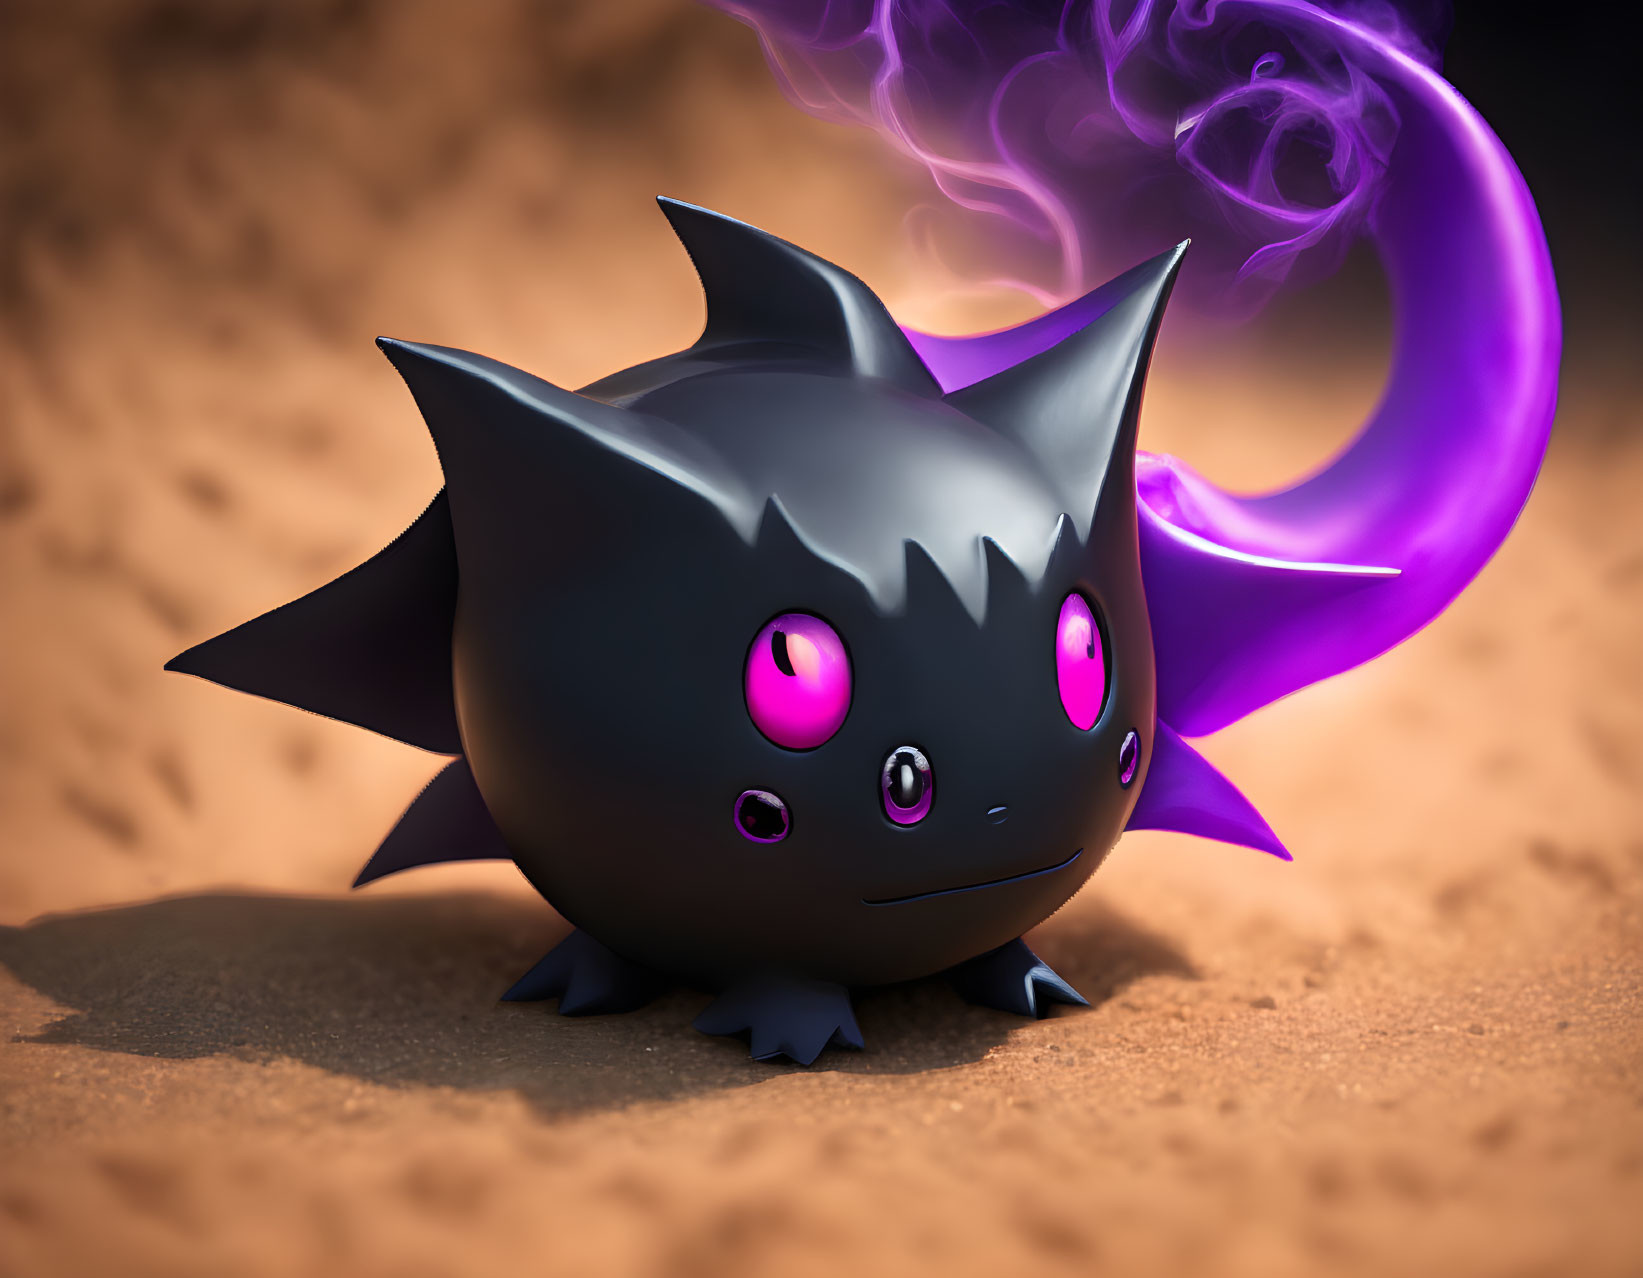 Stylized 3D-animated creature with black skin, purple eyes, spikes on sandy surface